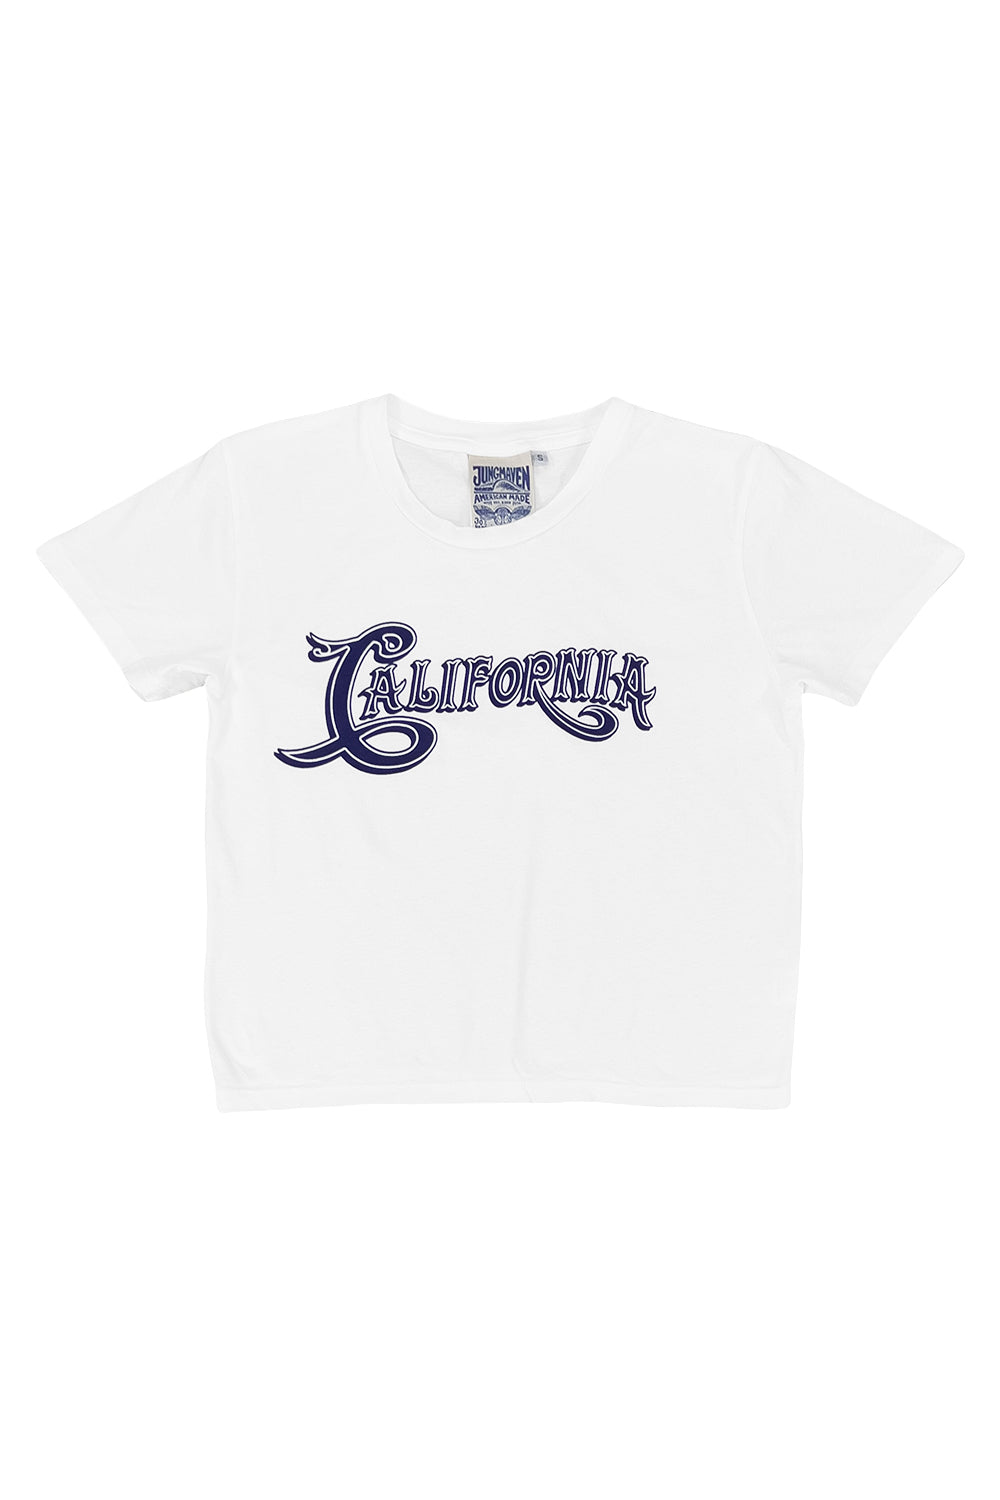 xCalifornia Cropped Ojai Tee - Sale Colors | Jungmaven Hemp Clothing & Accessories / Color:Washed White